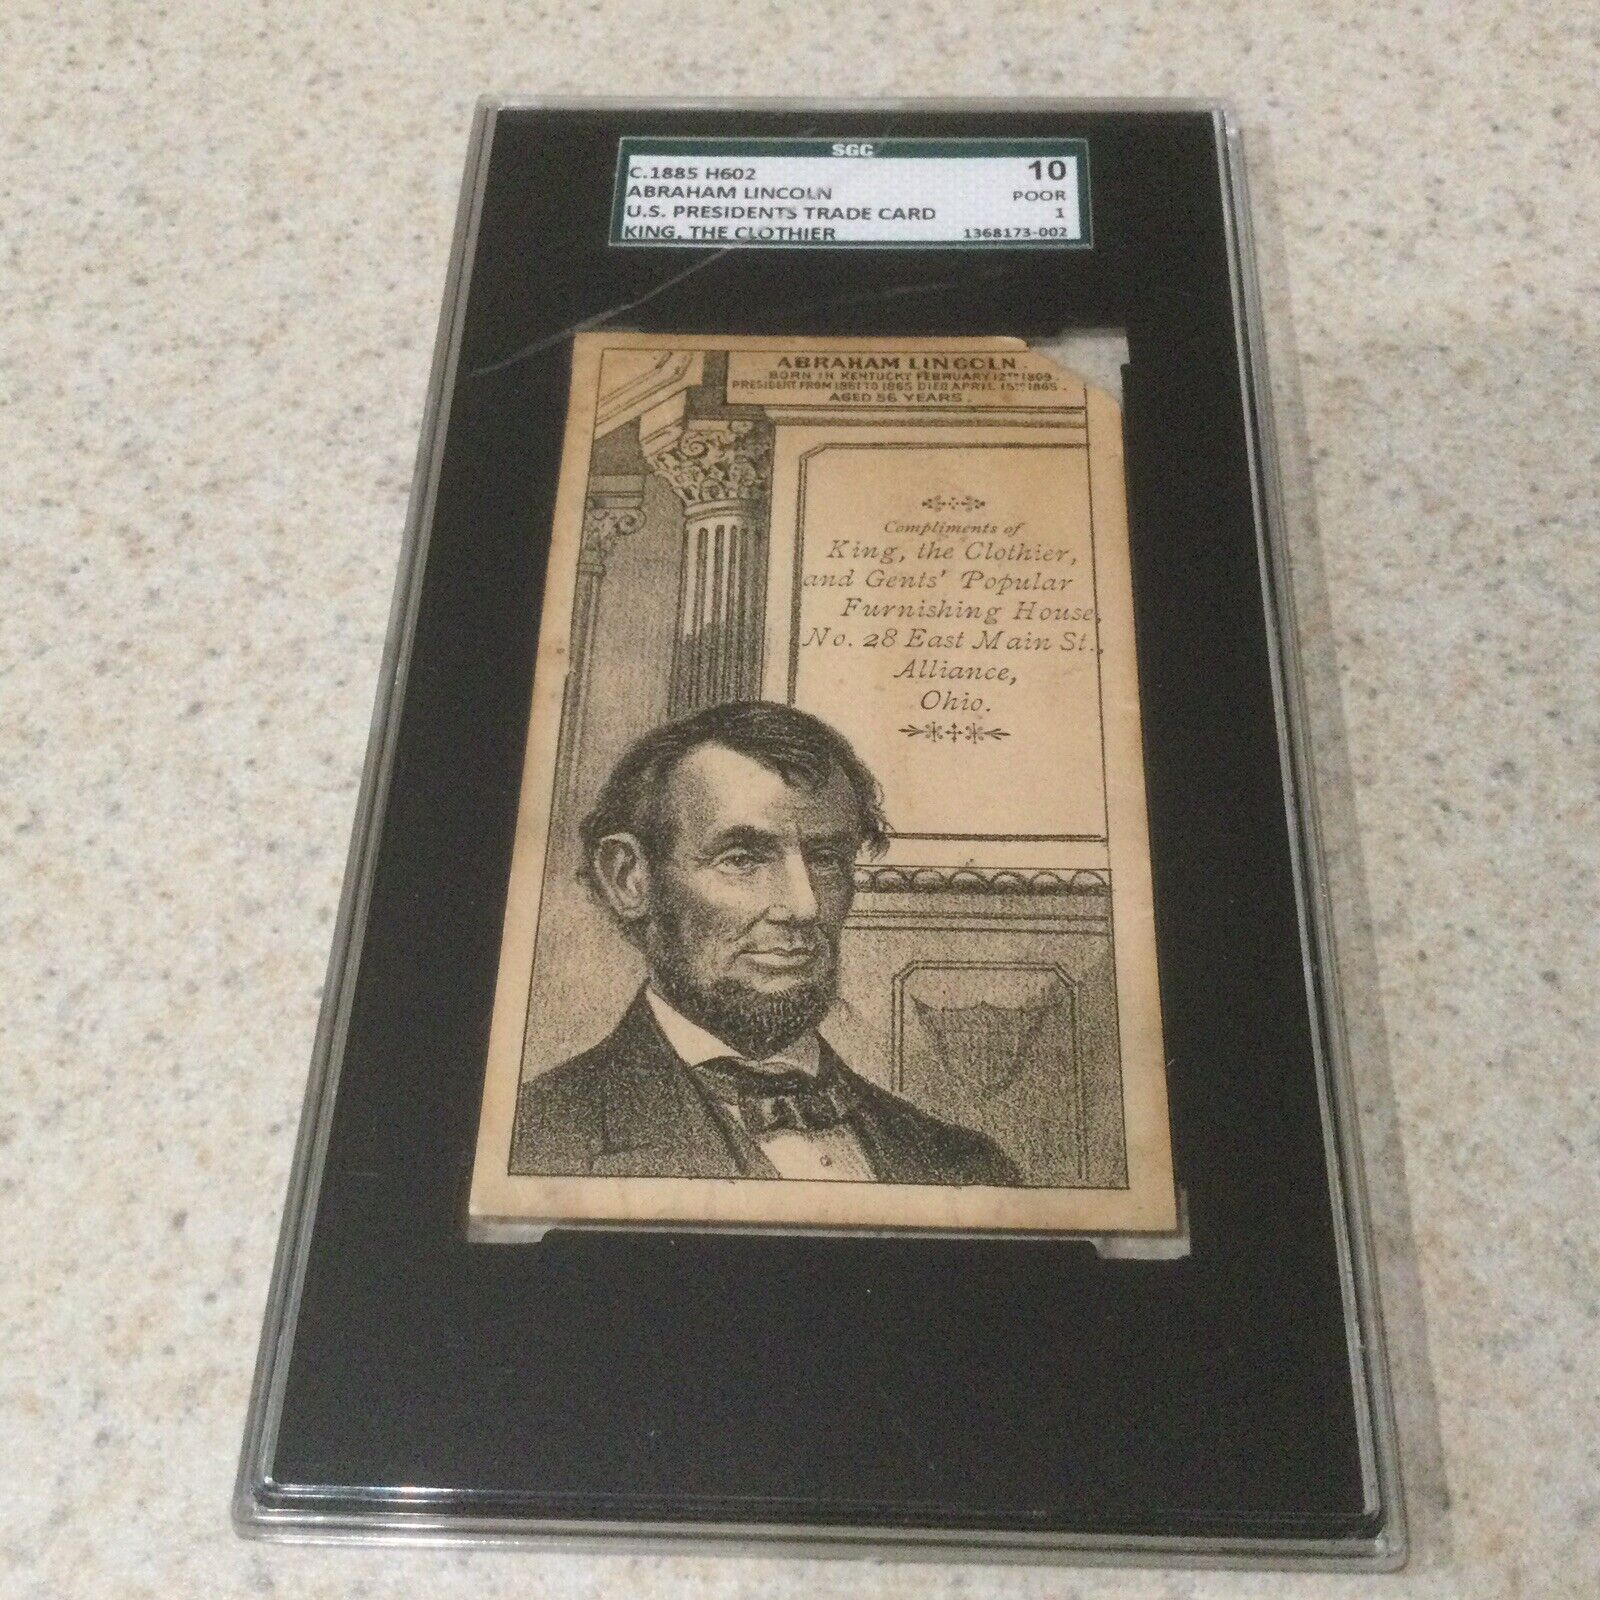 c.1885 H602 U.S. Presidents Trade Card - Abraham Lincoln SGC Poor 1